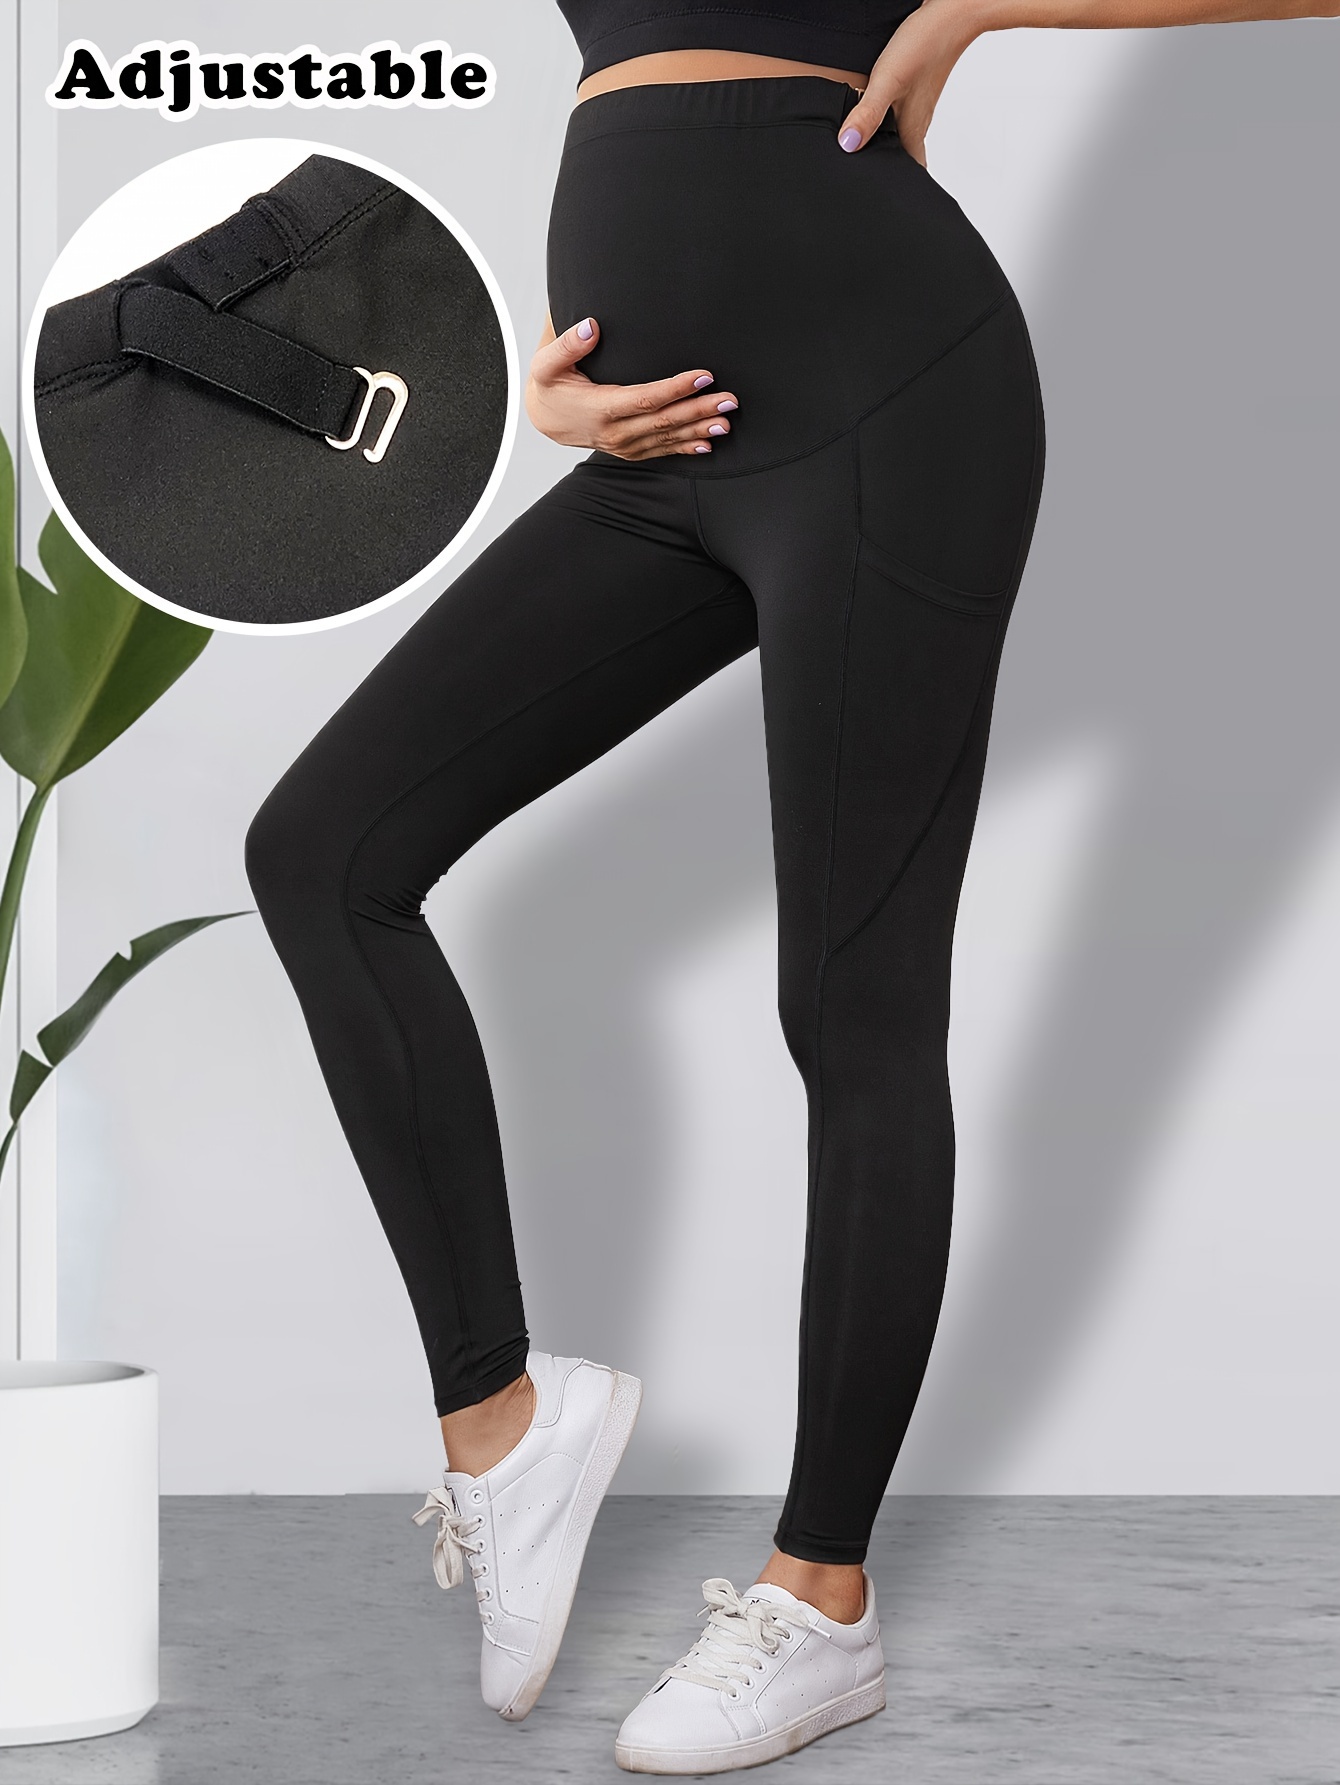 Can You Wear High-Waisted Leggings When Pregnant?